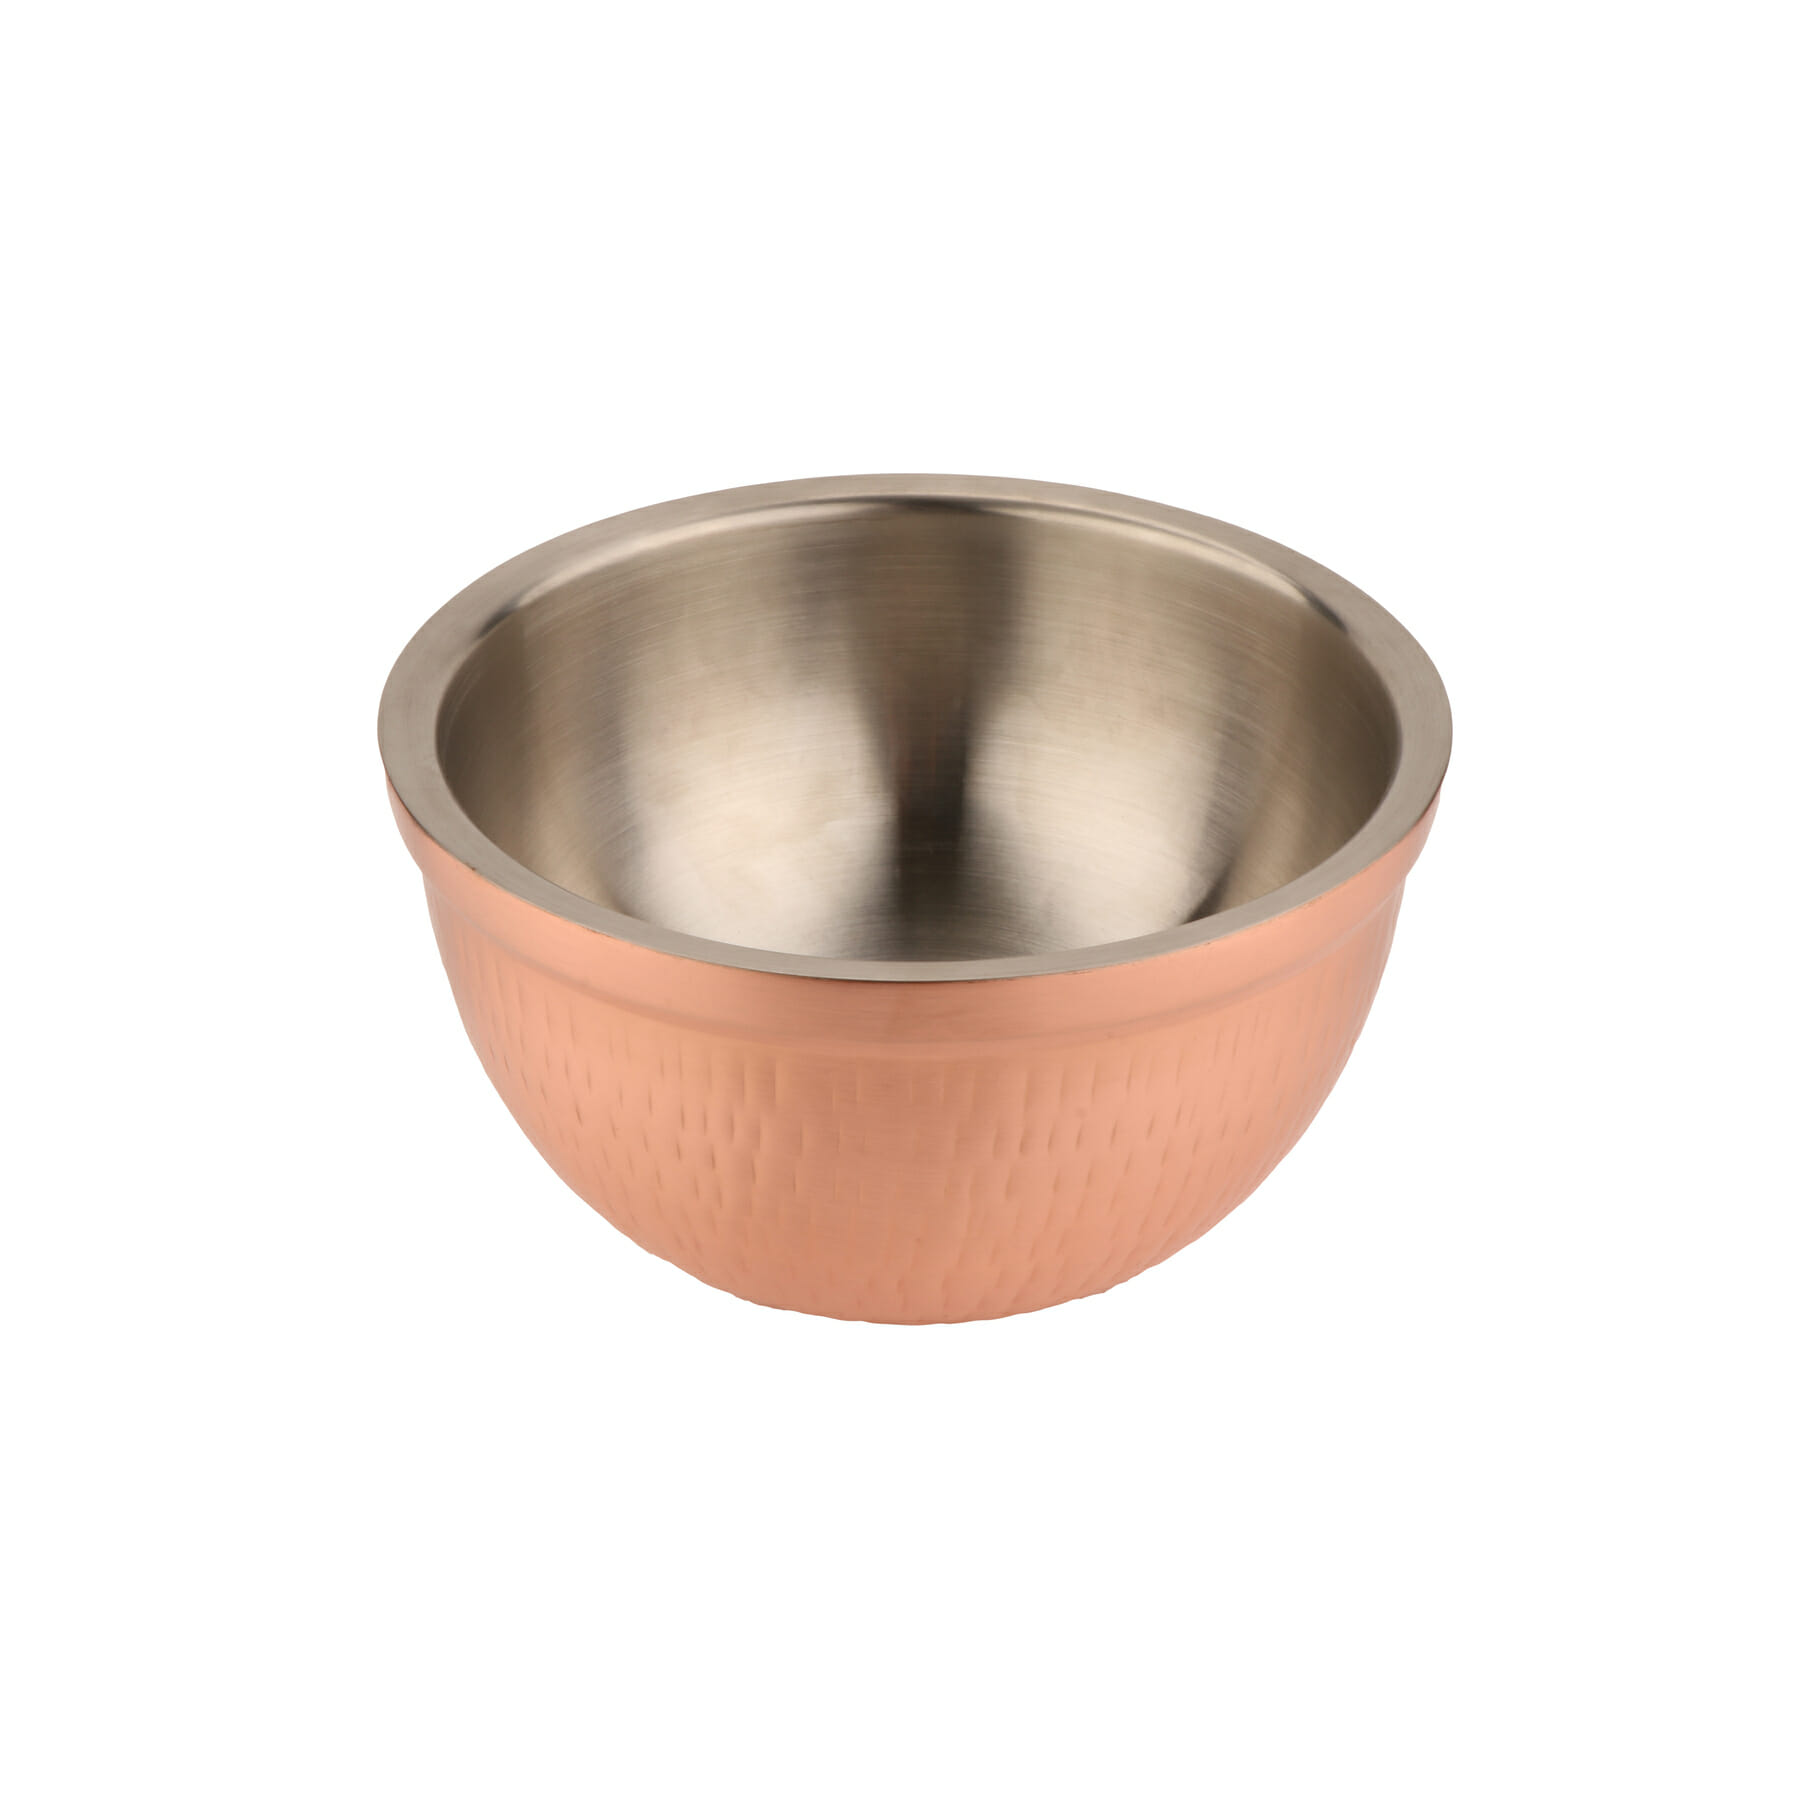 2 qt. (2.6 qt. rim-full), 9.5" Dia. Double Wall  Stainless Steel Insulated Bowl with Hammered Copper Finish, 4.75" deep